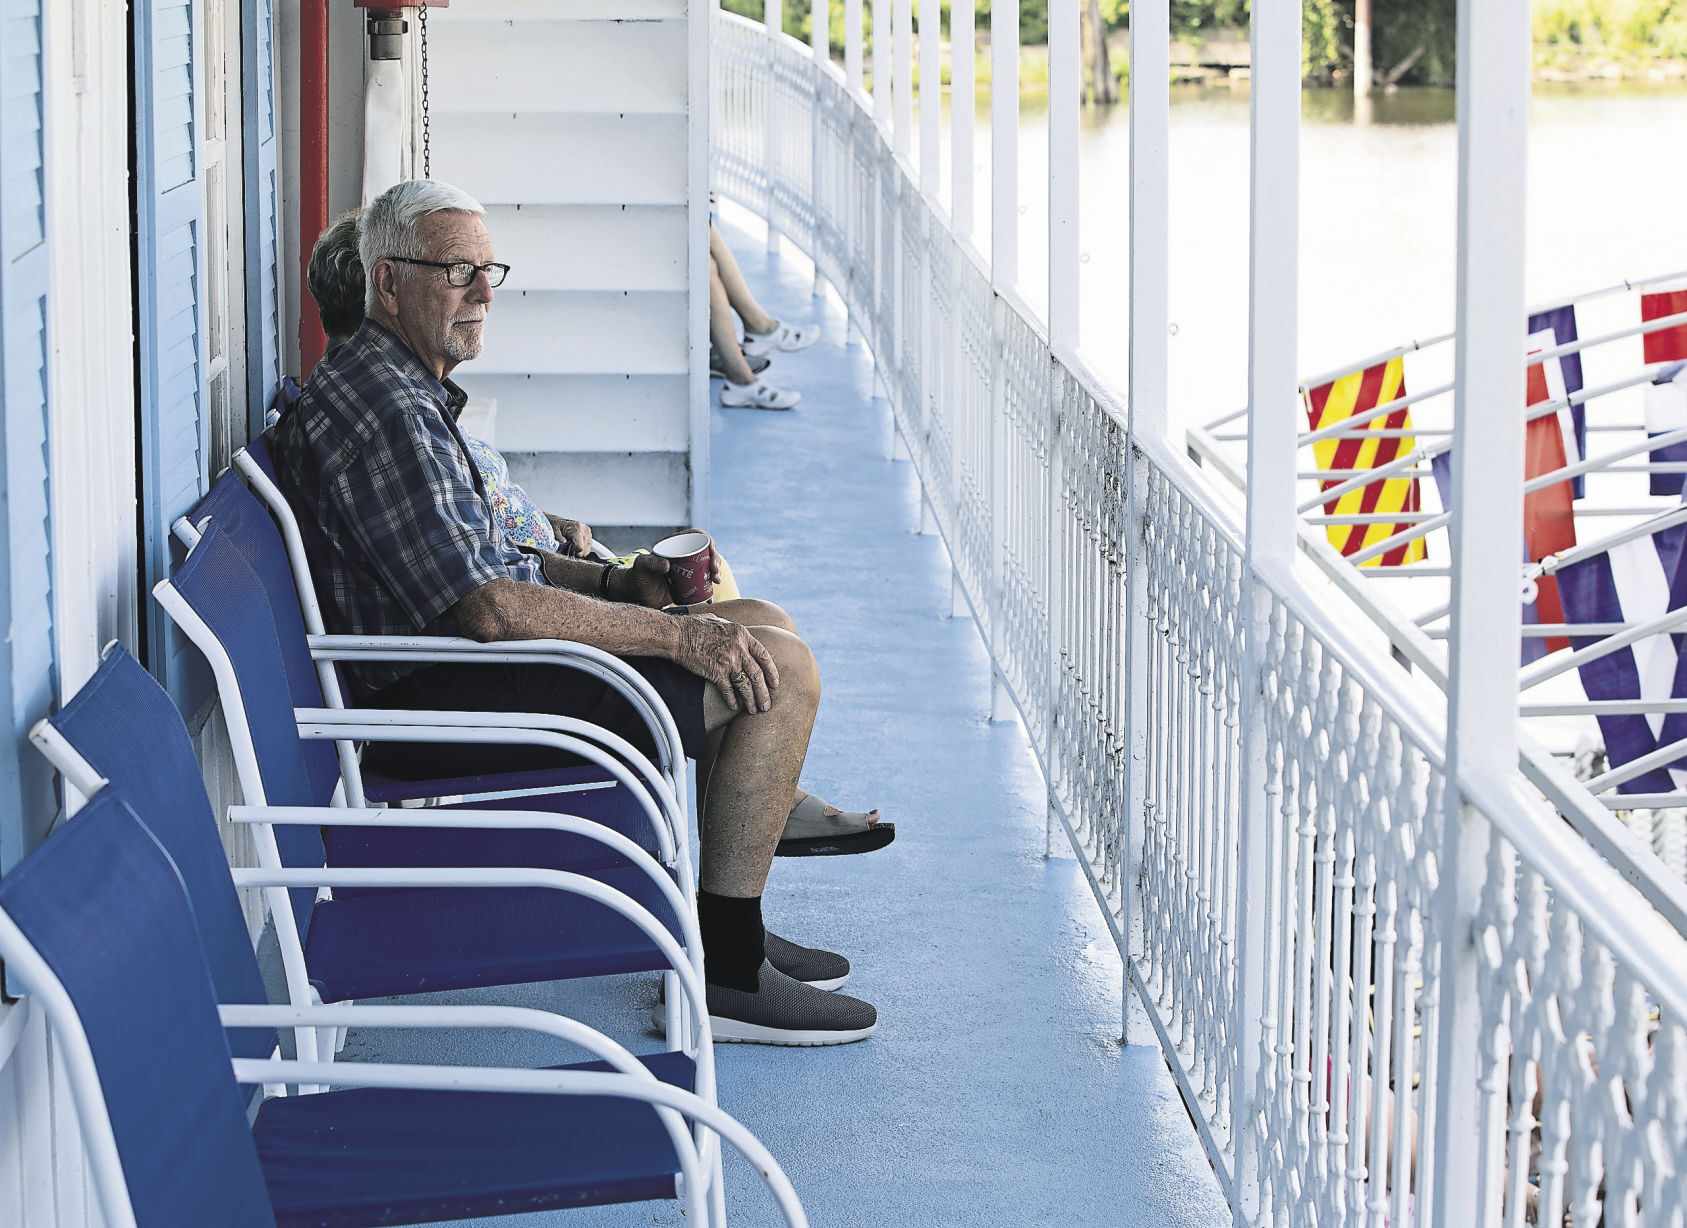 Dale Verhoeff, of Lincoln, Neb., relaxes on the deck as he waits for the Riverboat Twilight to depart the Port of Dubuque.    PHOTO CREDIT: Stephen Gassman